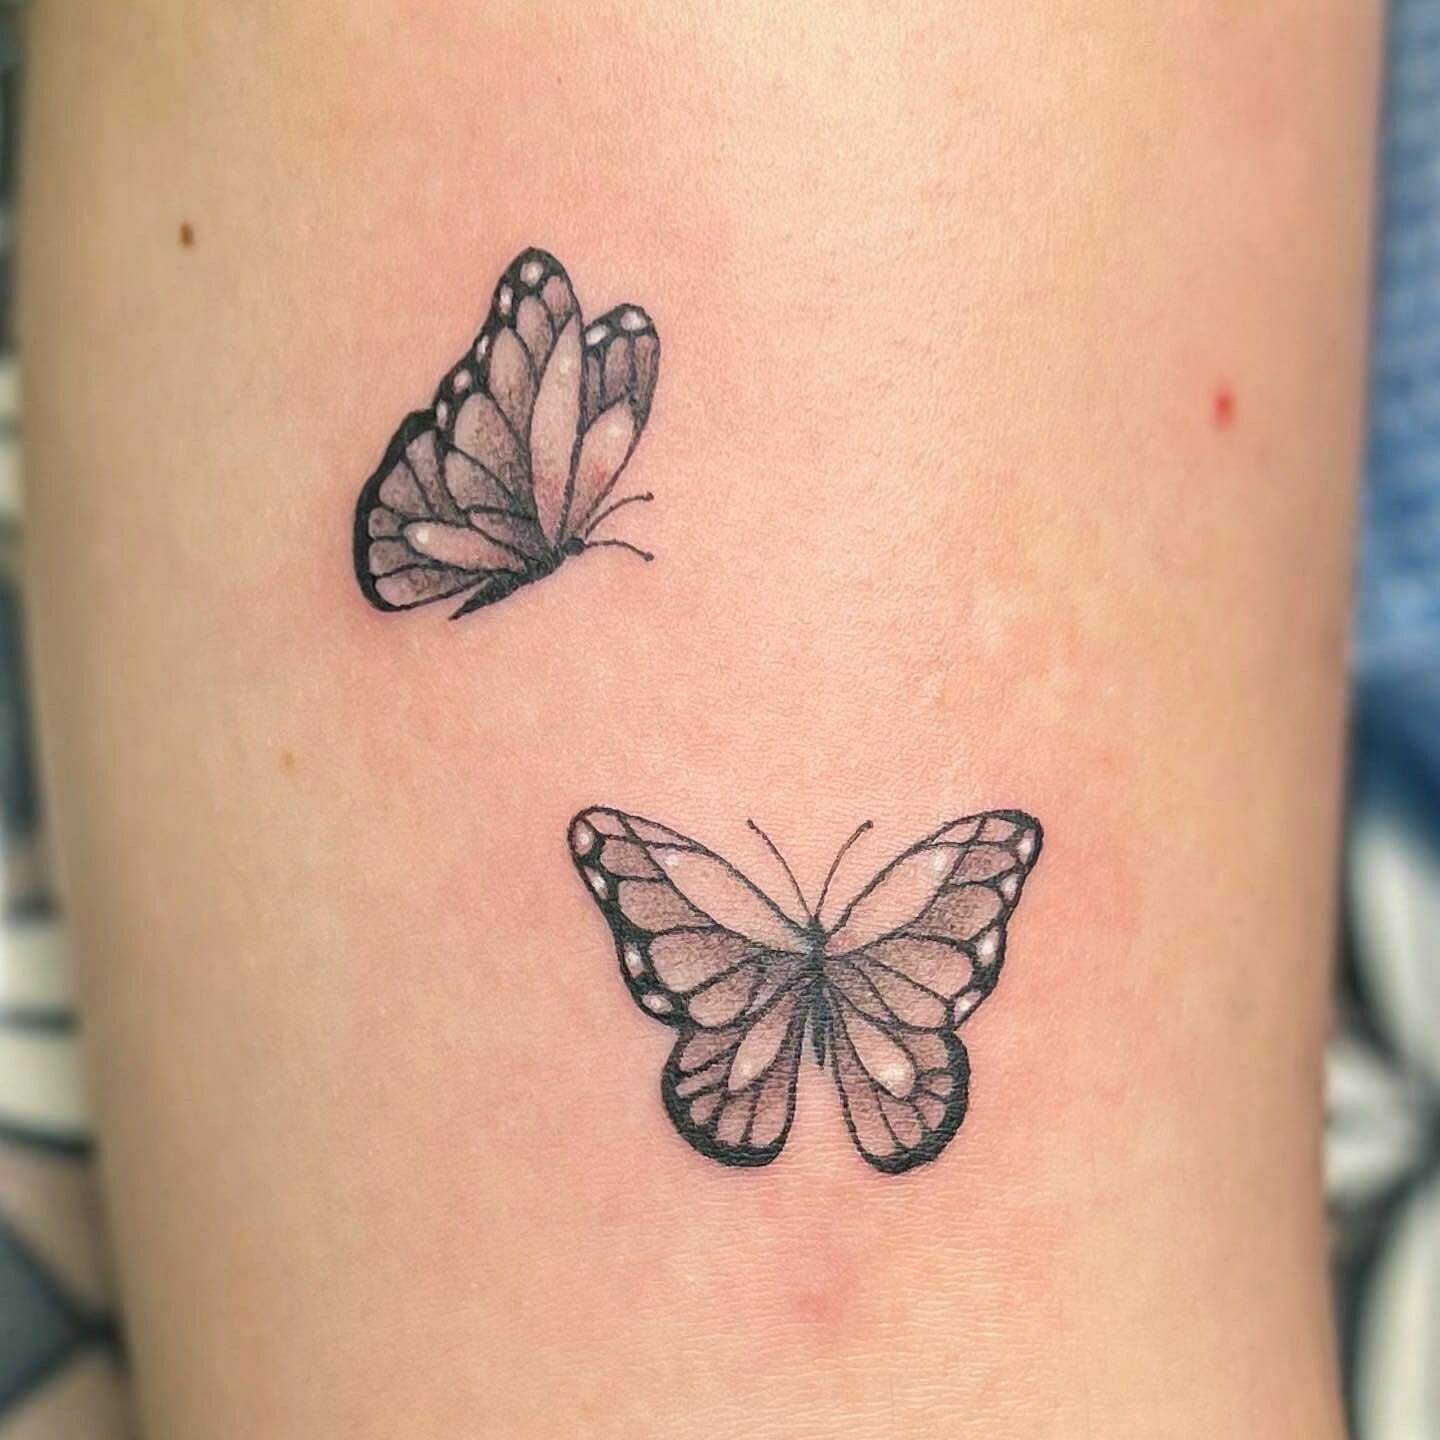 Angelica Mavrianos | Couple tattoos from earlier | Instagram